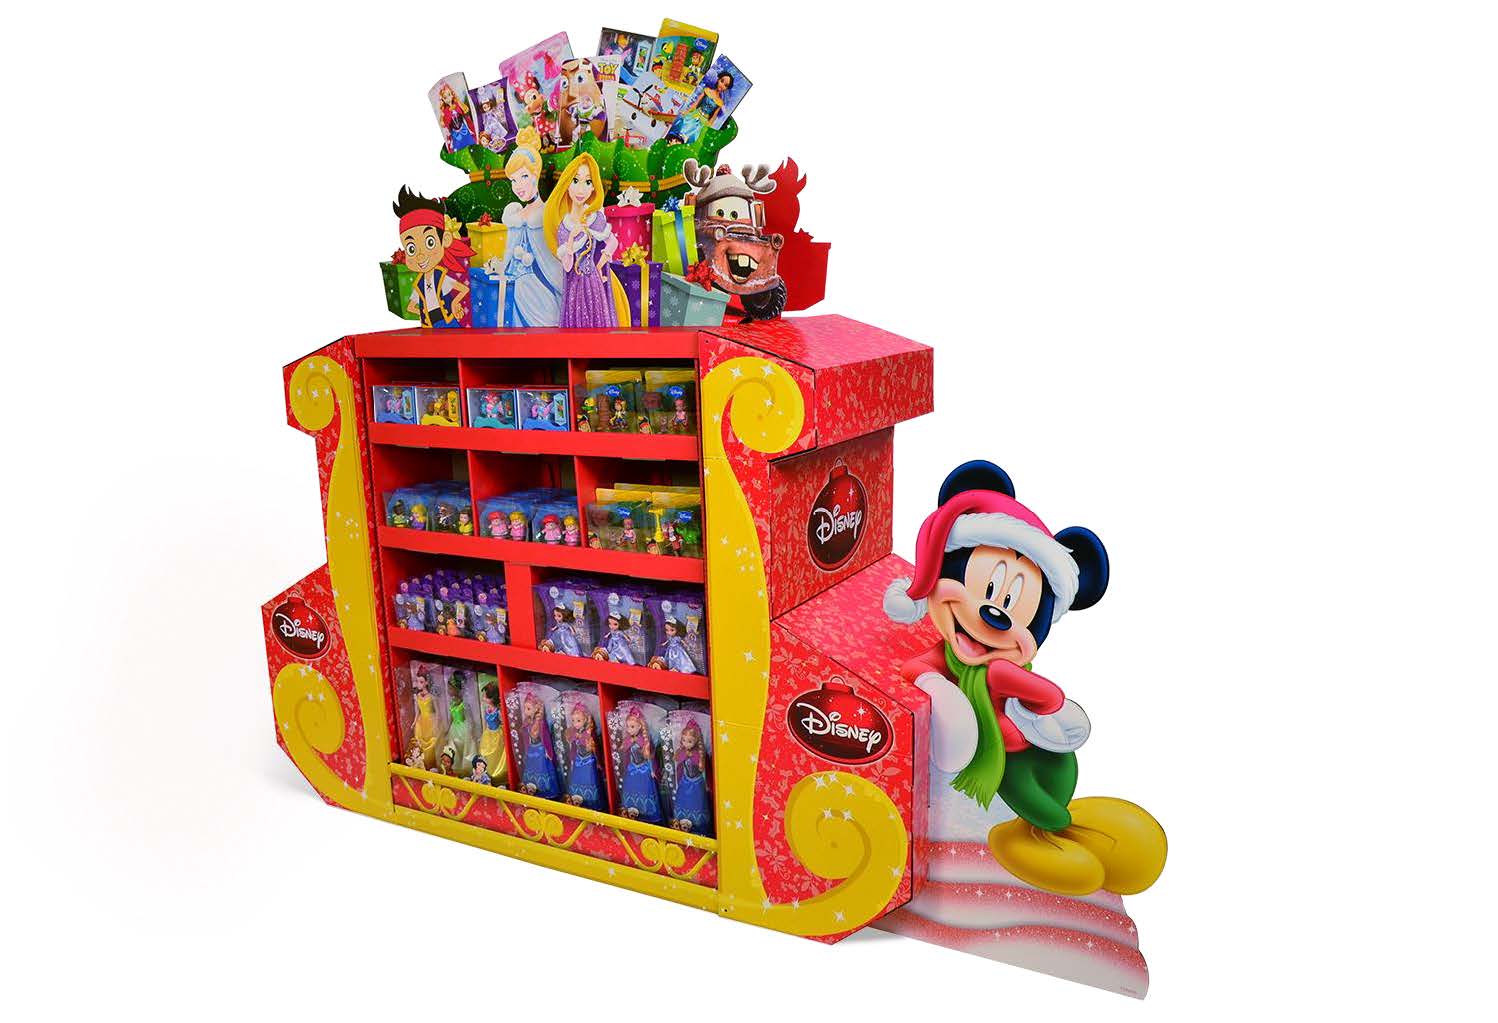 Disney holiday retail display for toys and dolls